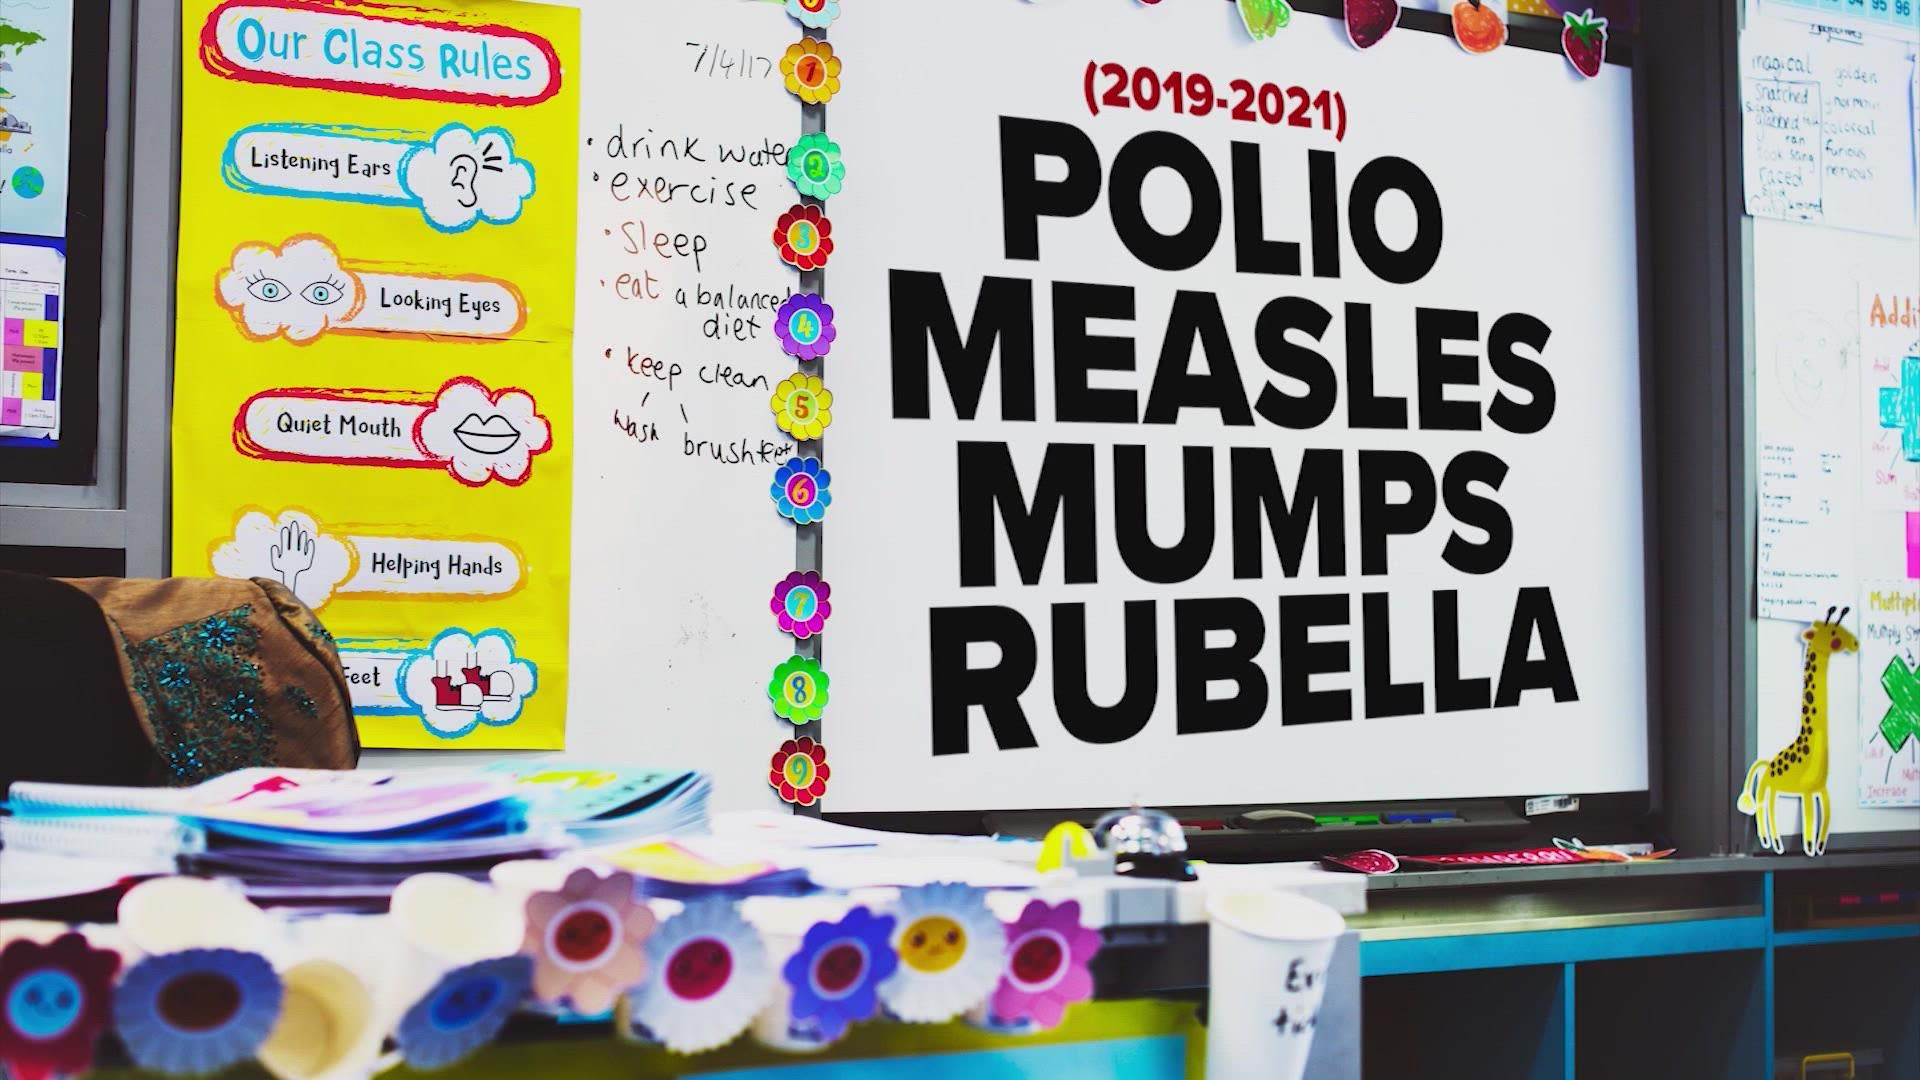 State data show a drop in vaccination rates among kindergartners for polio and MMR.